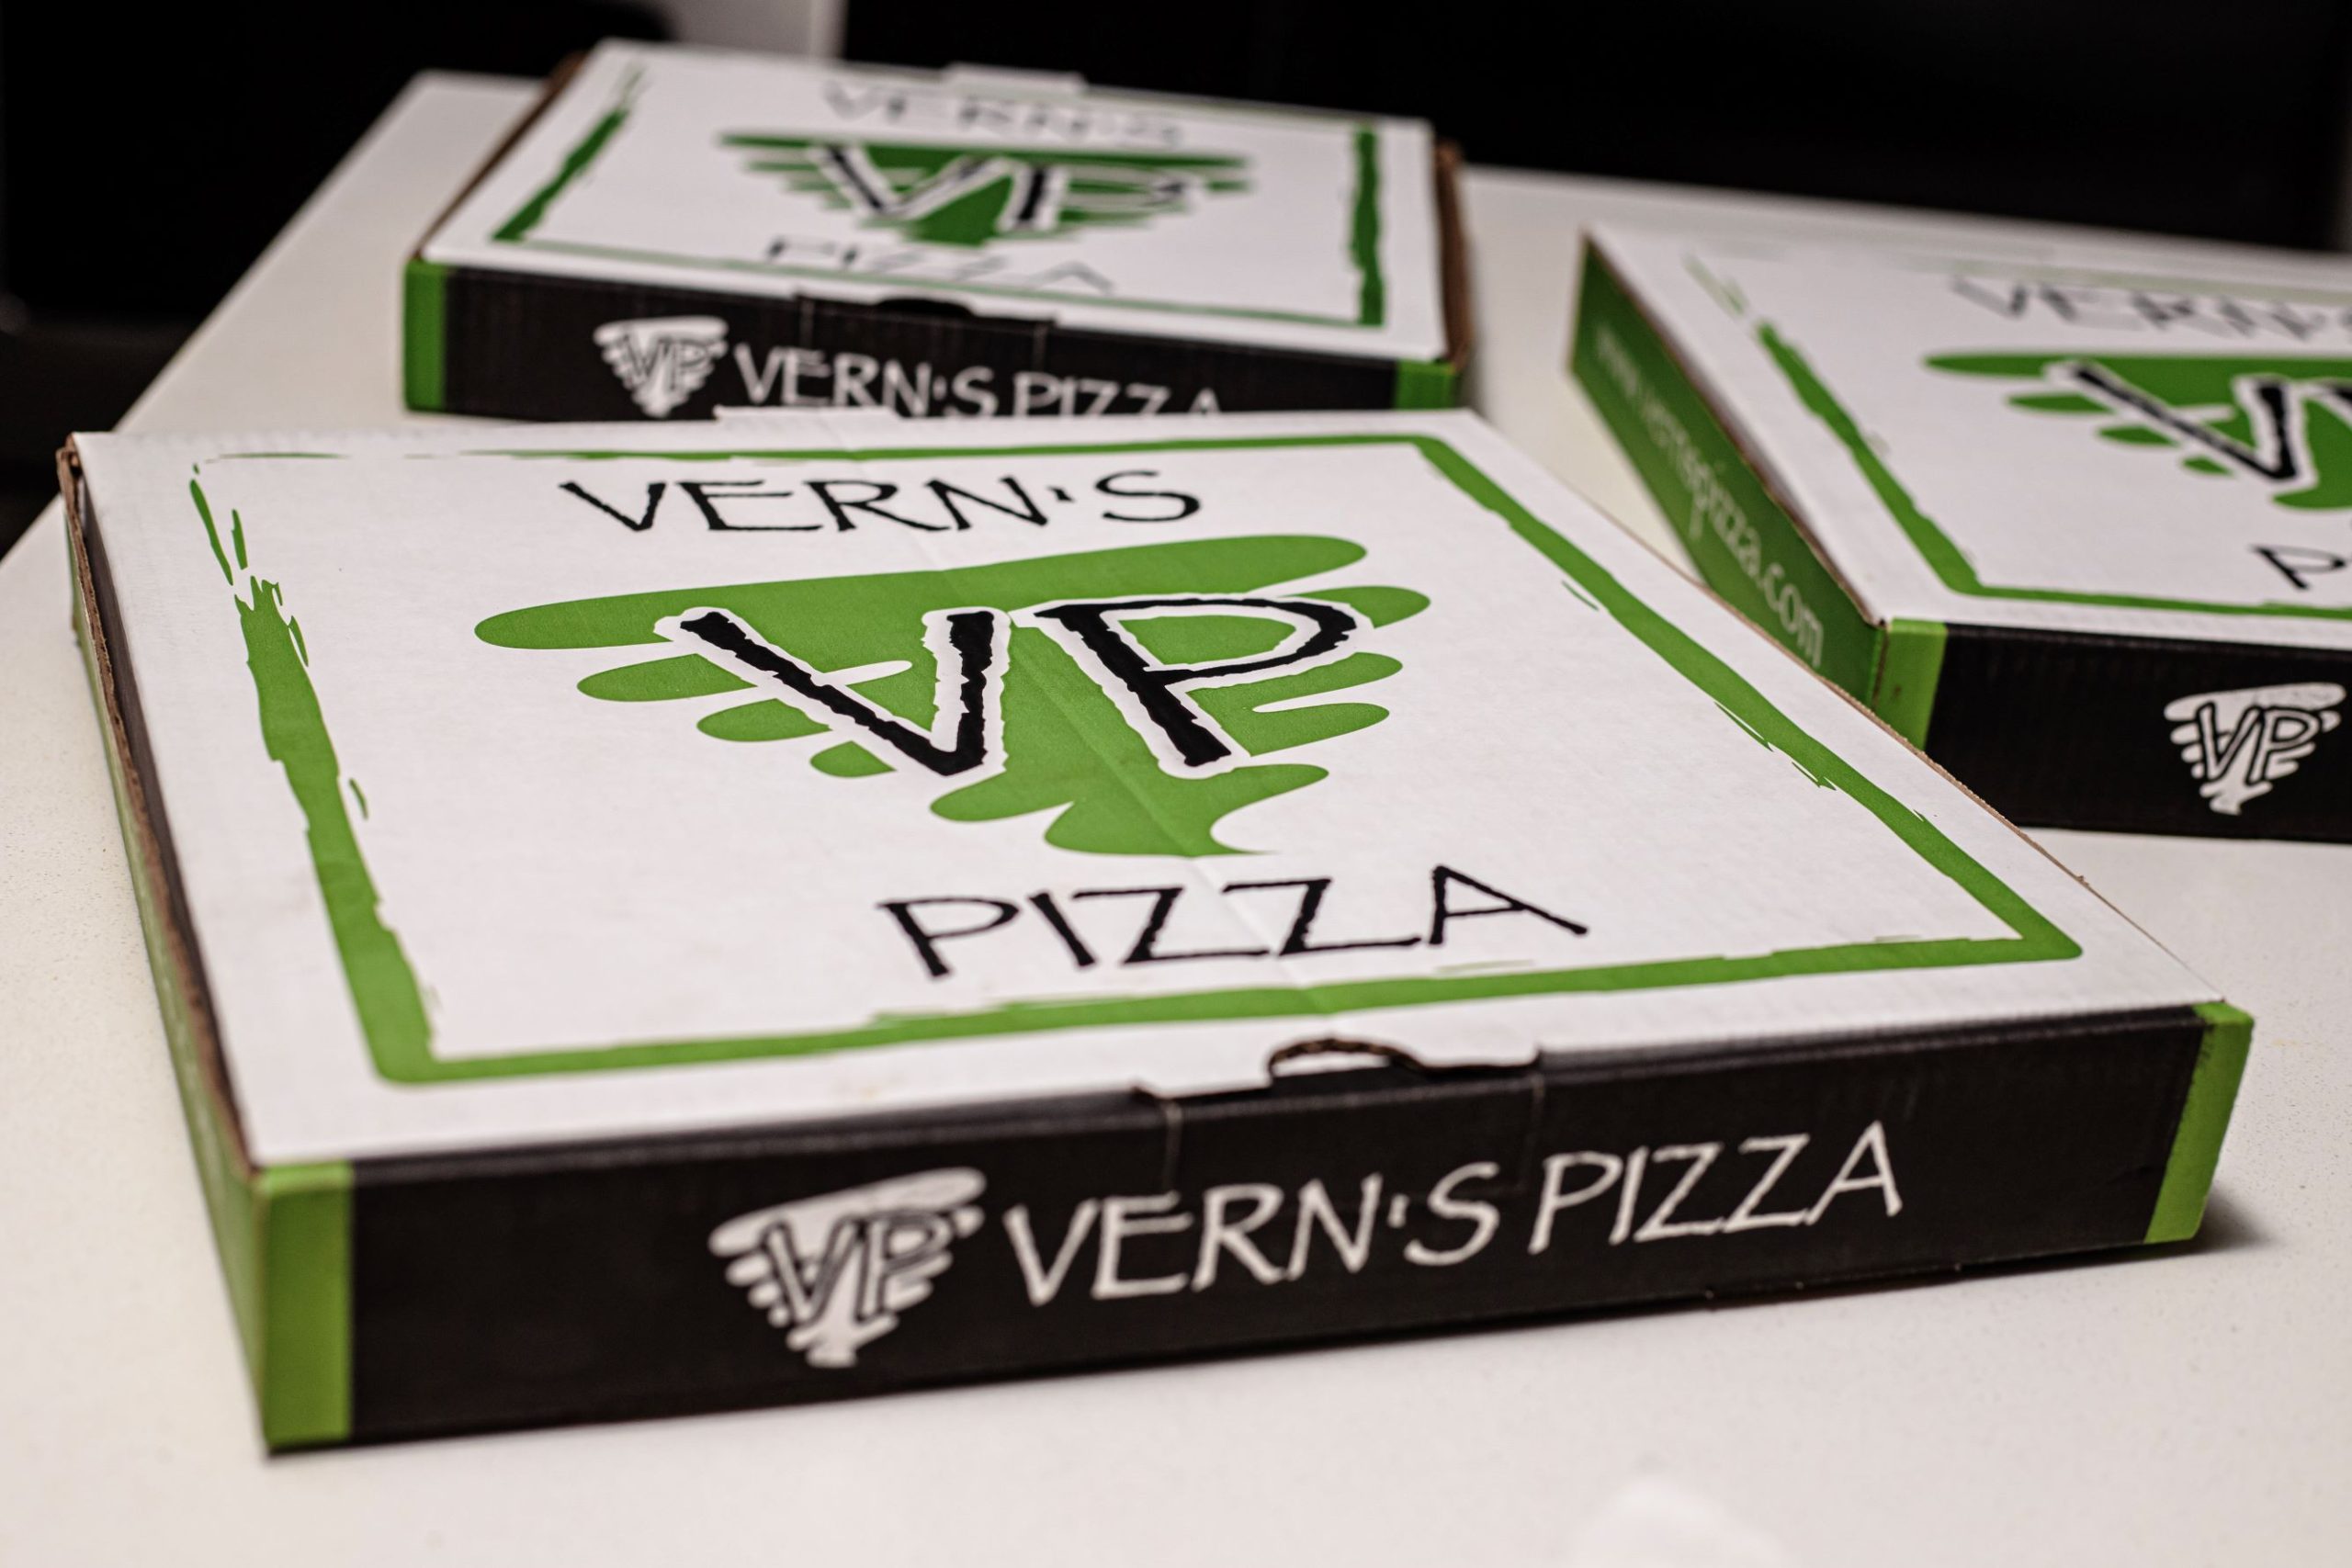 leclair-media-video-production-and-videography-company-food-photography-shoot-with-verns-pizza-5